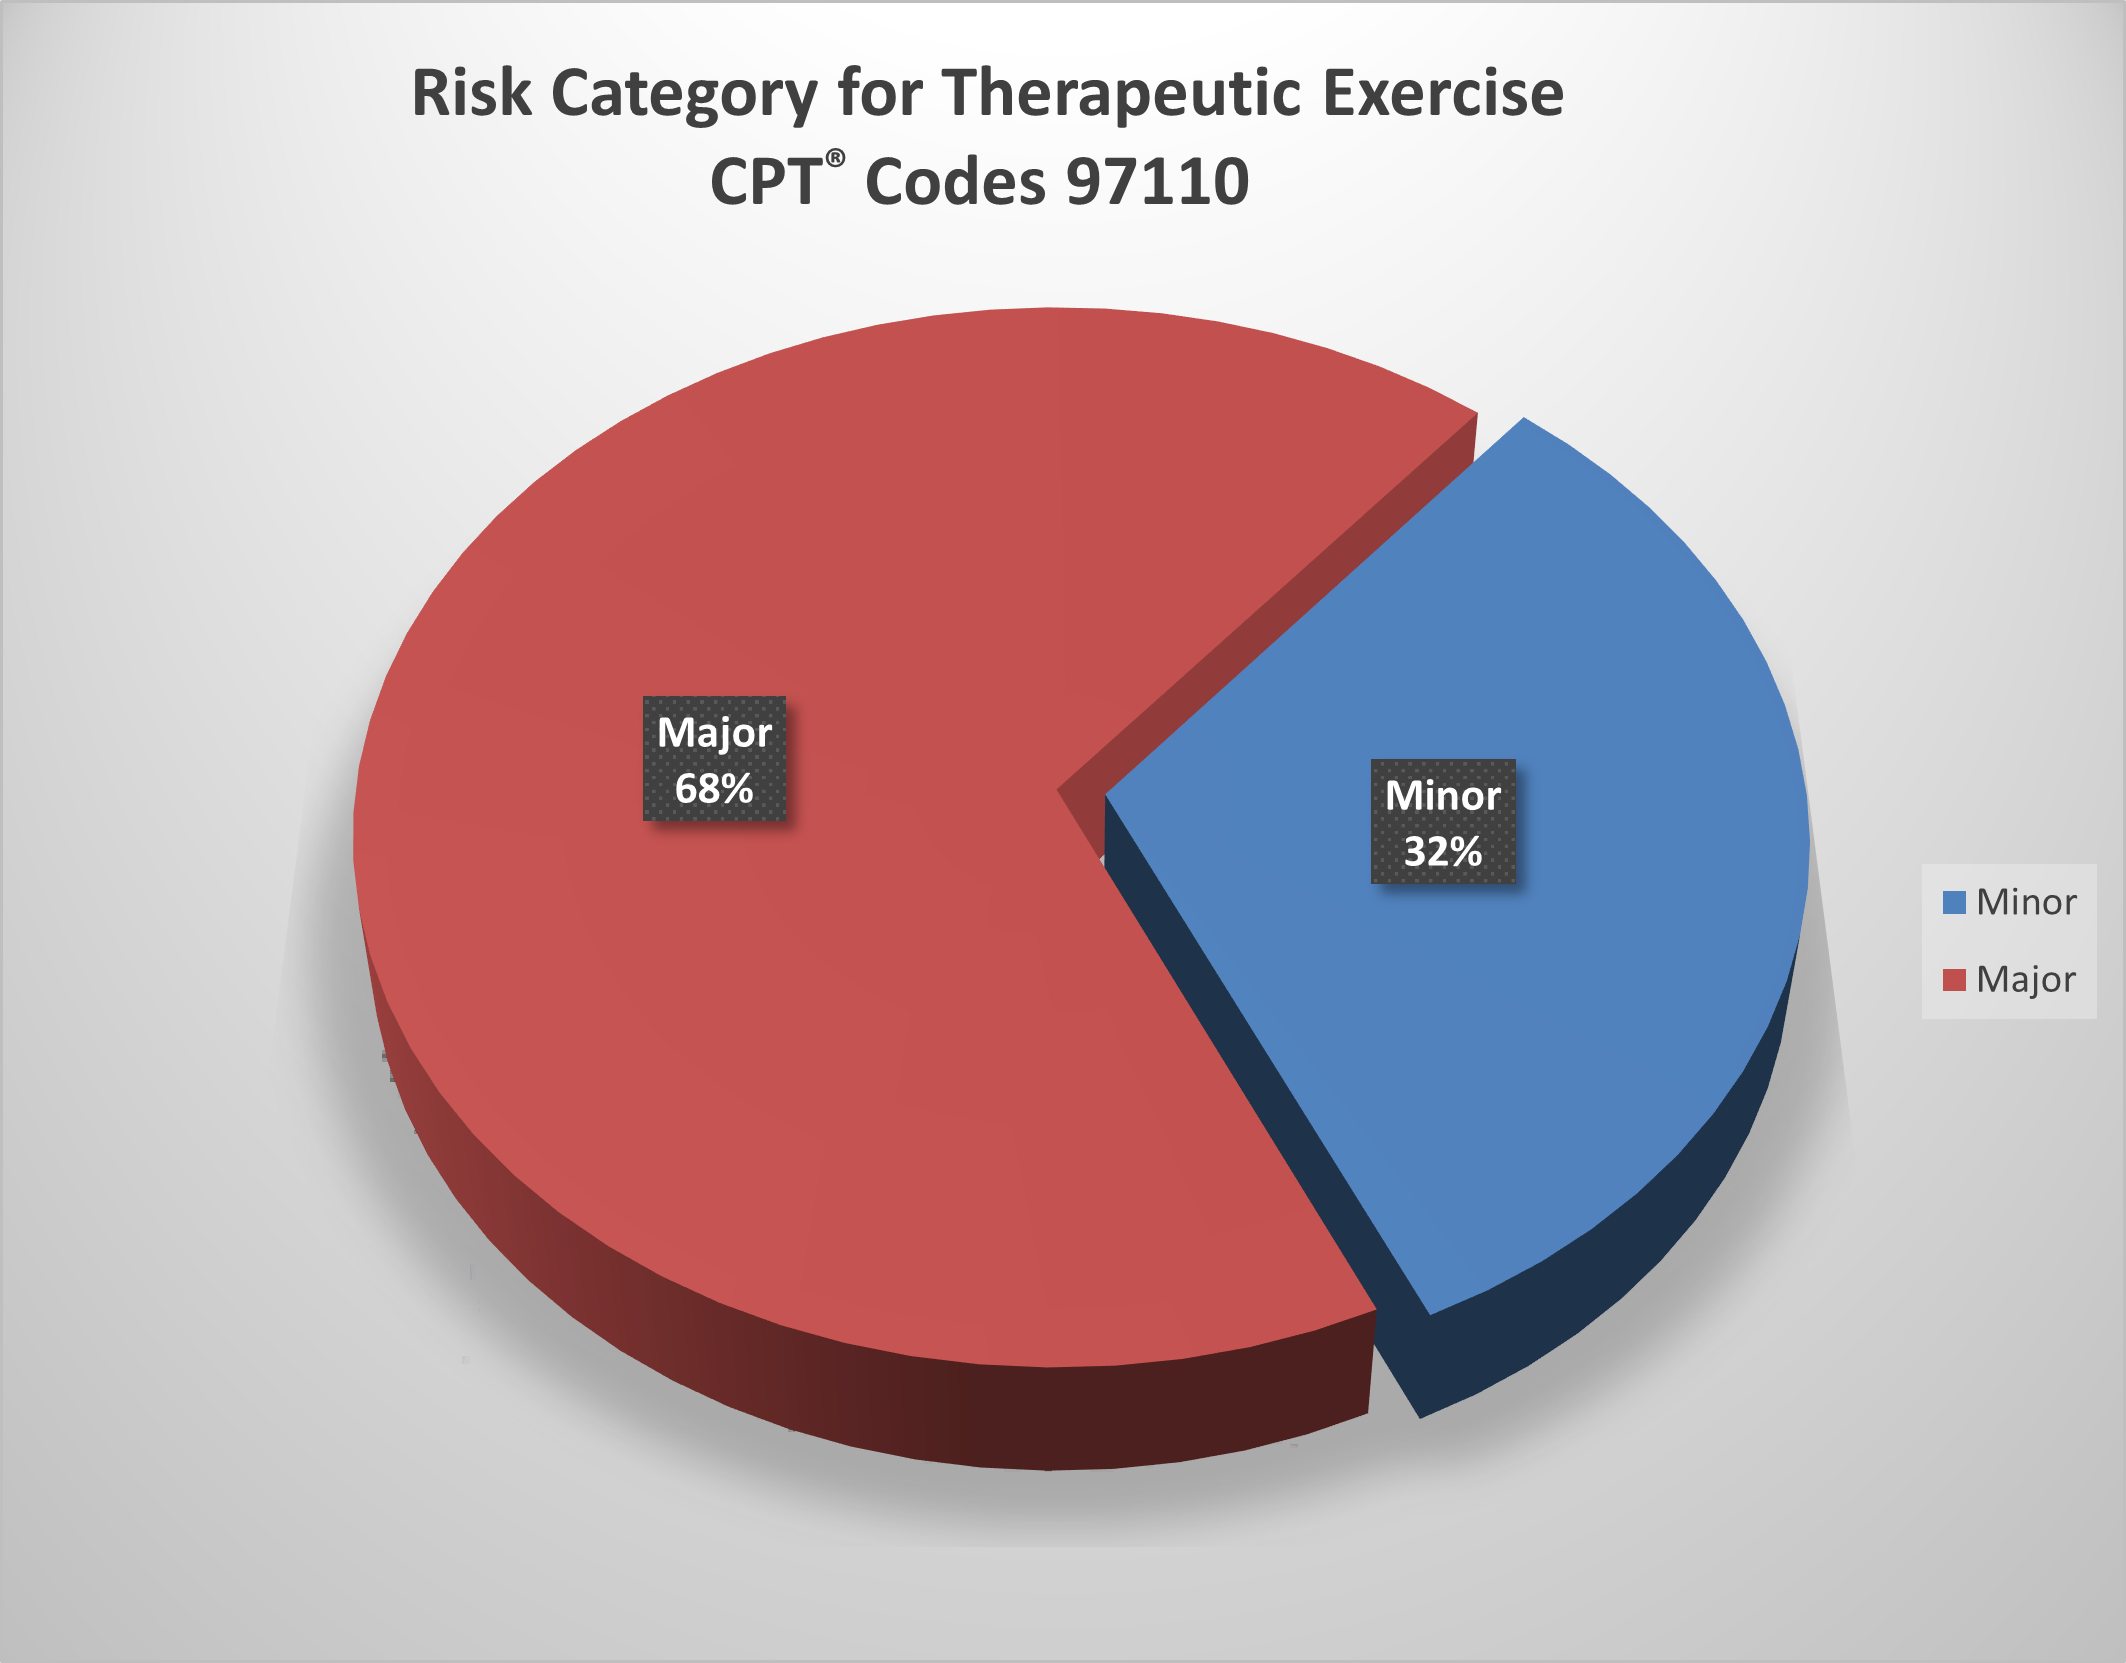 The categories for Current Procedural Terminology (CPT) code 97110 for Therapeutic Exercise are defined.